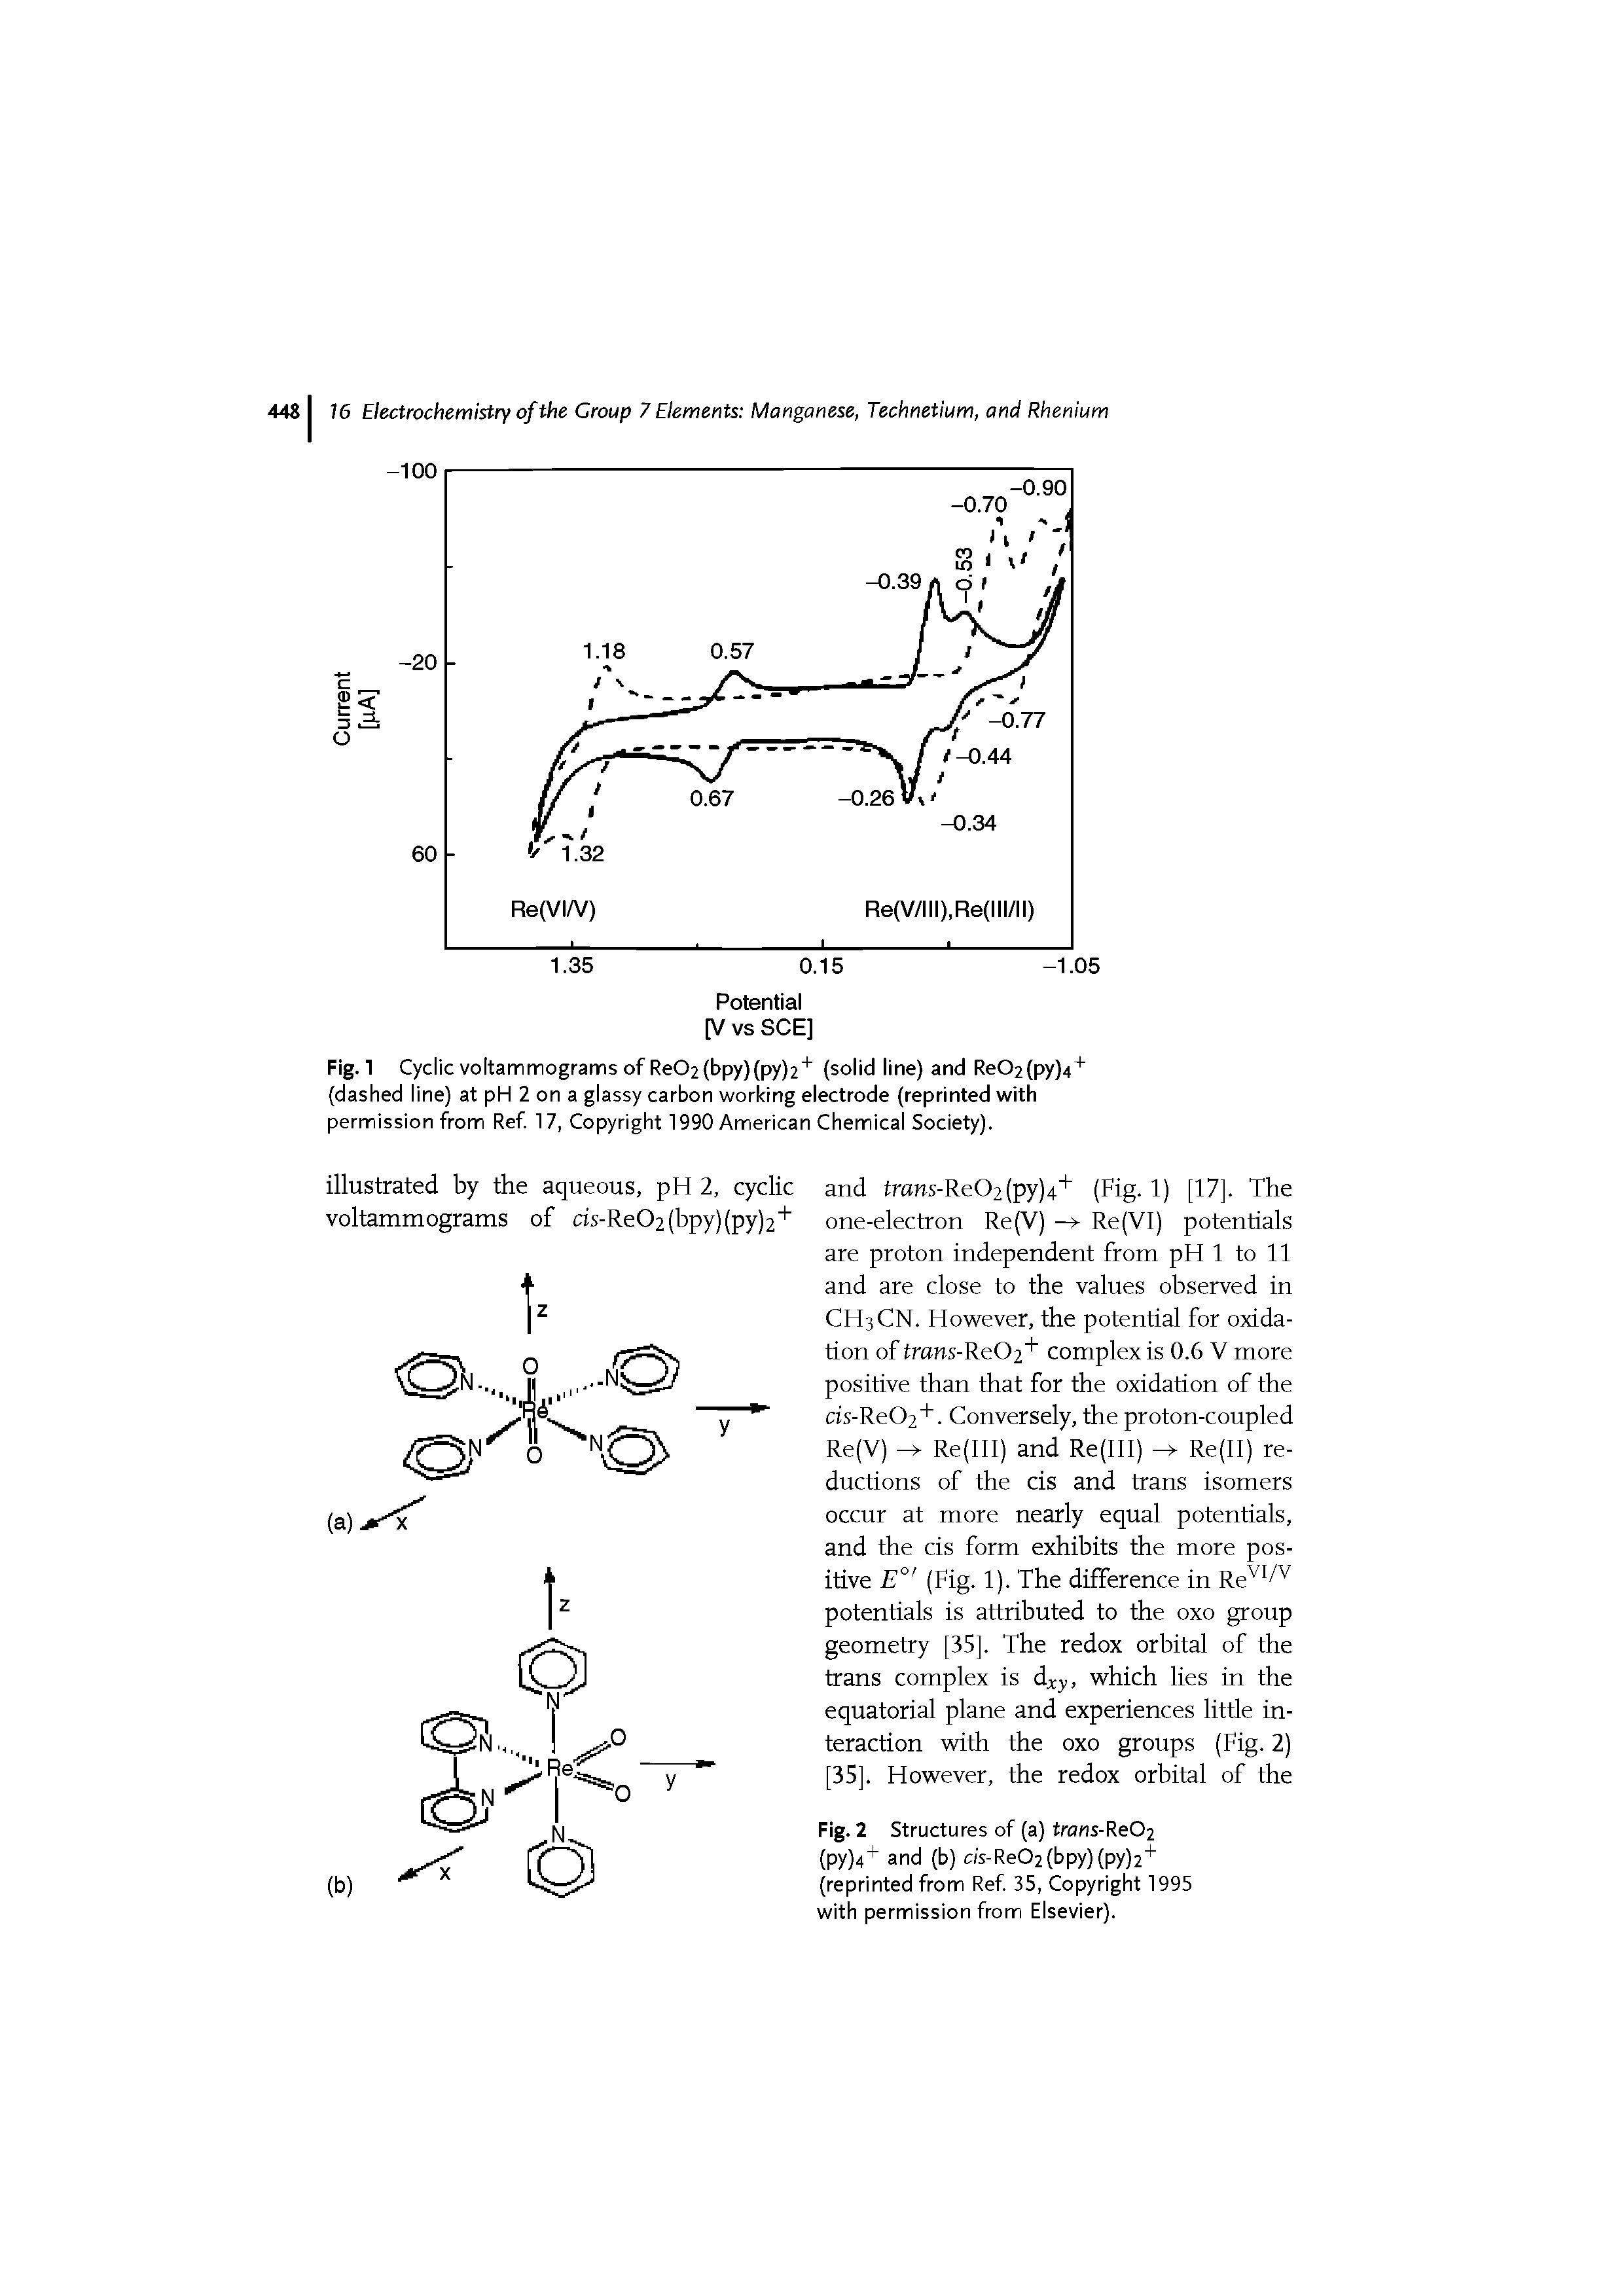 Fig. 1 Cyclic voltammograms of Re02(bpy)(py)2 (solid line) and Re02(py)4+ (dashed line) at pH 2 on a glassy carbon working electrode (reprinted with permission from Ref 17, Copyright 1990 American Chemical Society).